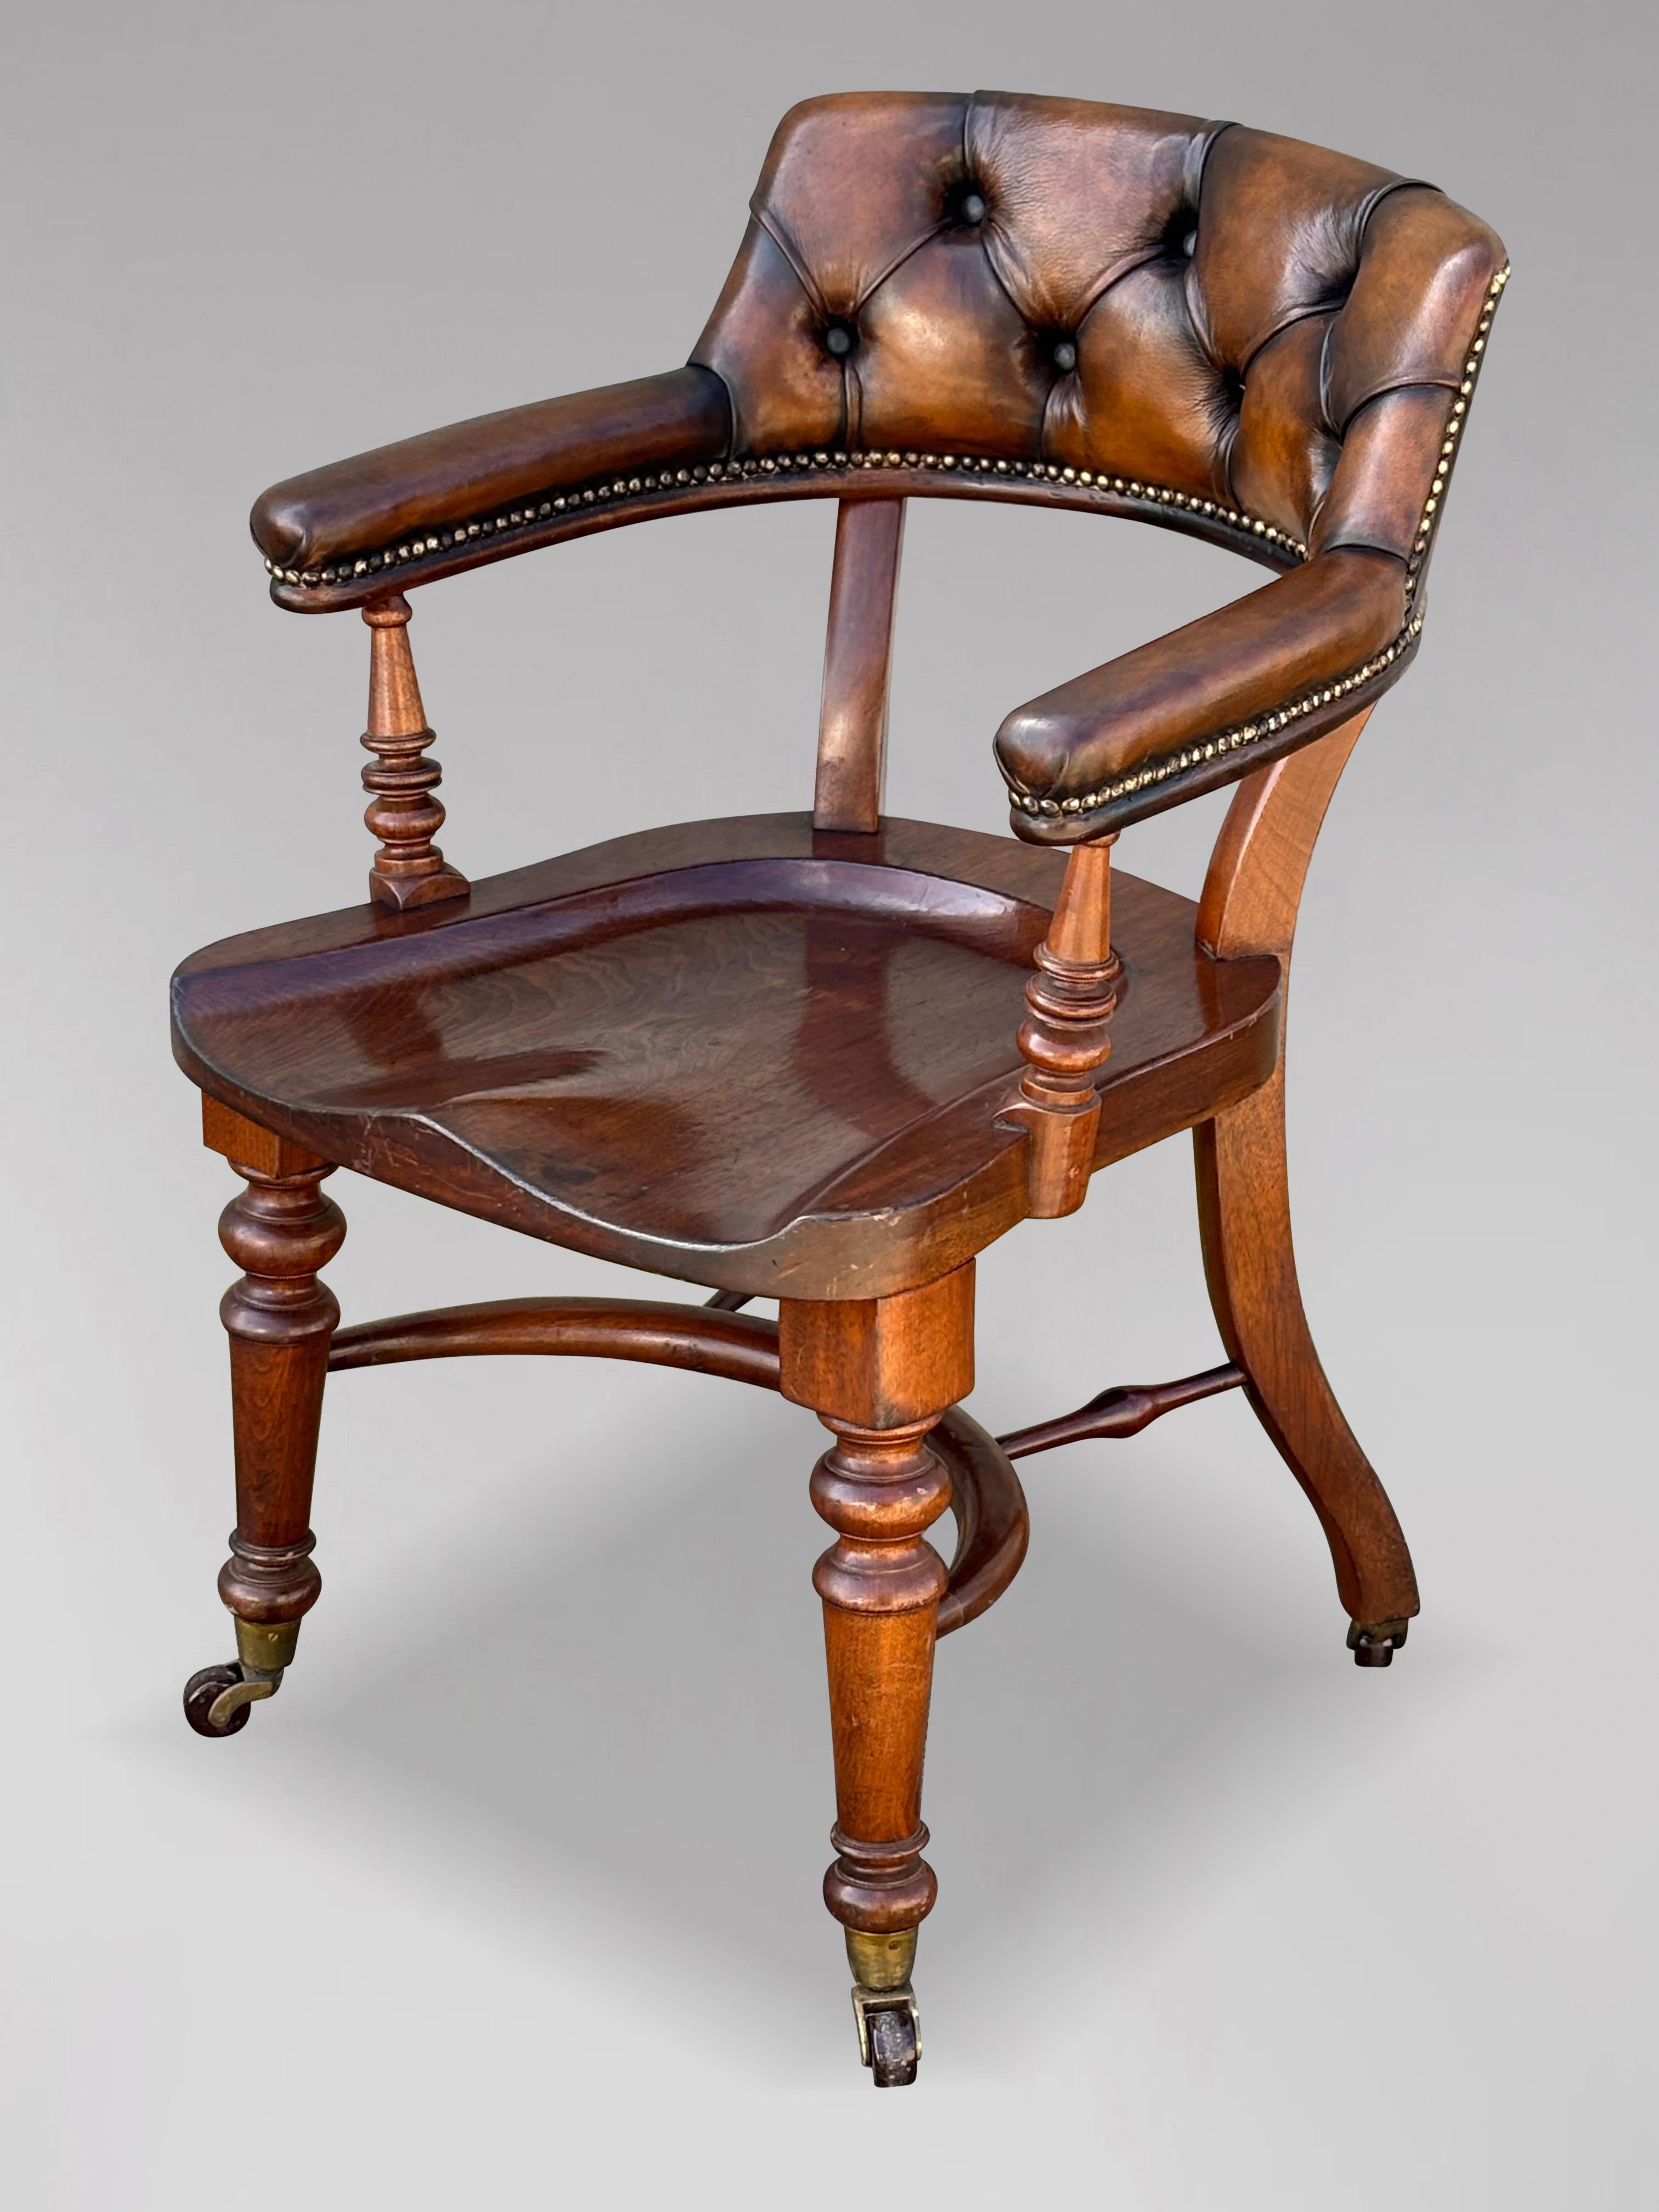 Victorian 19th Century Saddle Seat Leather Desk Armchair For Sale